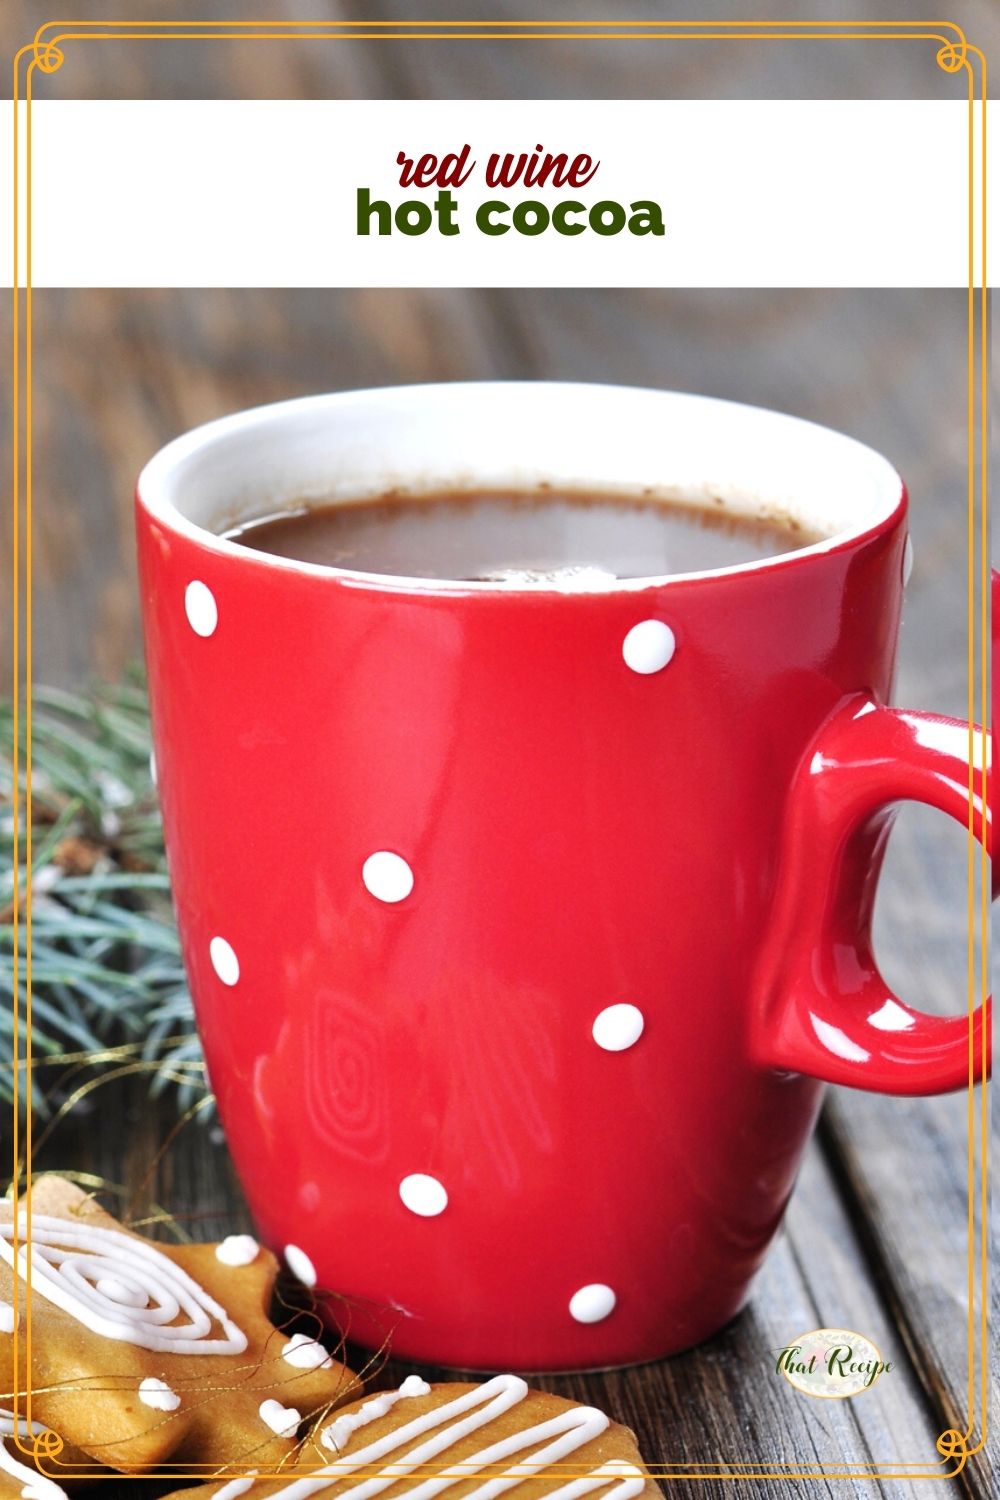 mug of cocoa with text overlay "red wine hot cocoa"